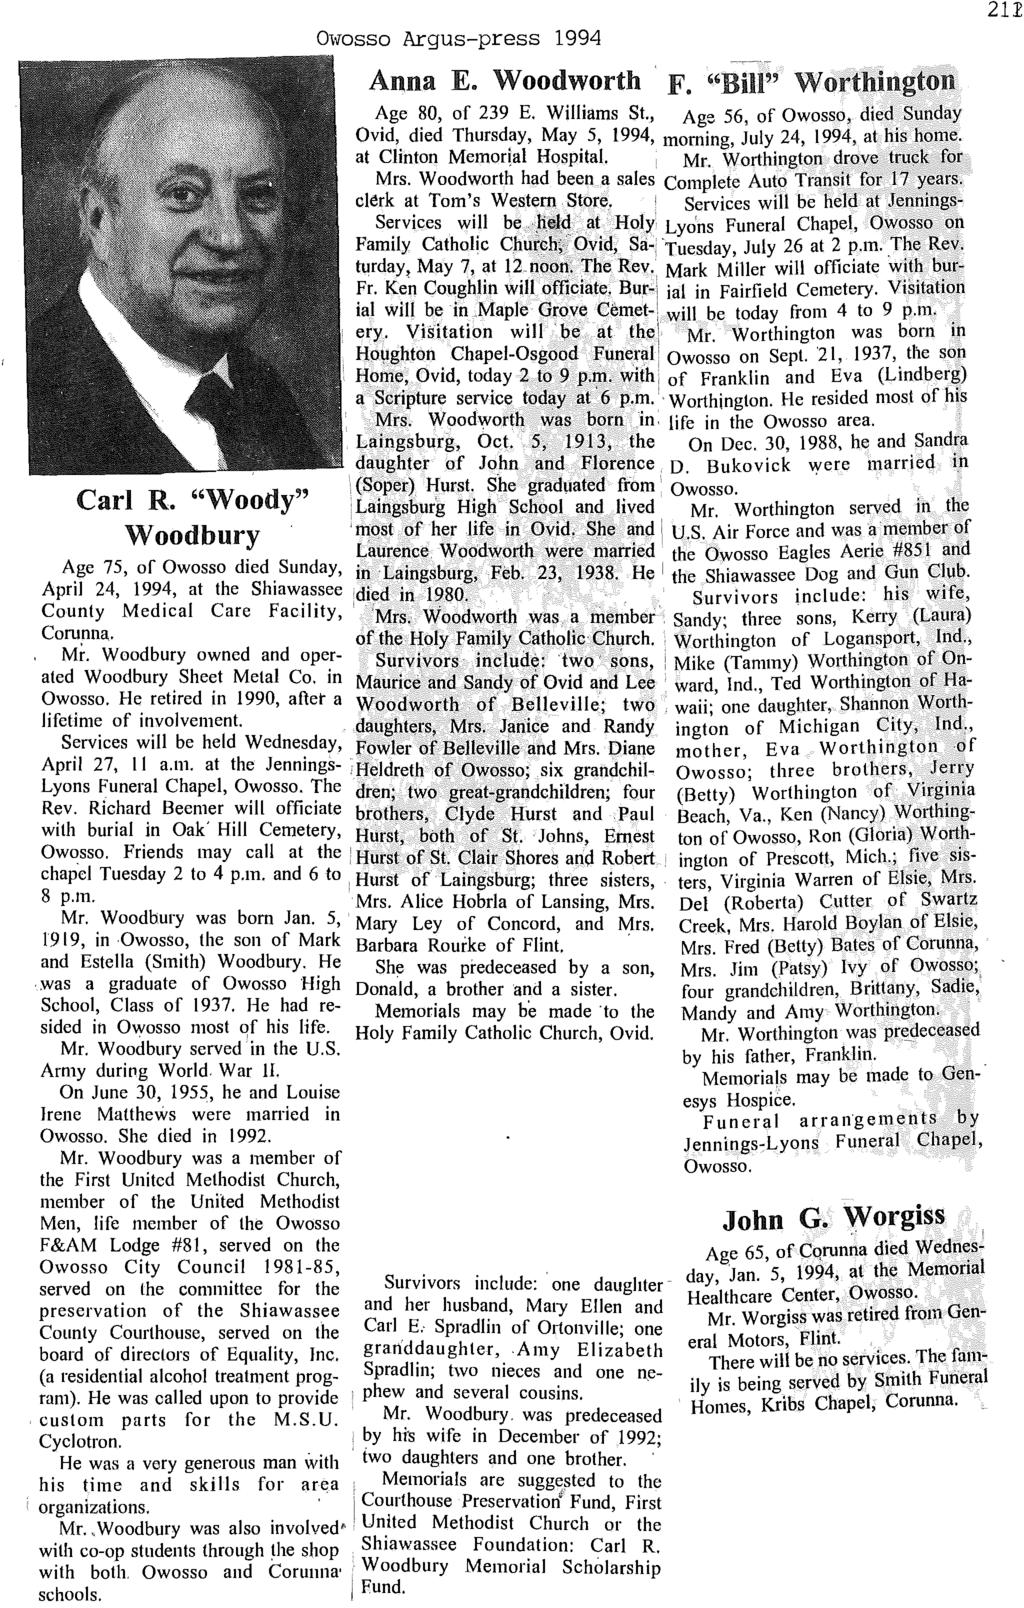 Owosso Argus-press 1994 A~na E.,Woodworth F. "Bill" Worthington Age 80, of 239 E. Williams St., Age 56, of Owosso, died Sunday Ovid, died Thursday, May 5, 1994, morning, July 24, 1994, at his home.